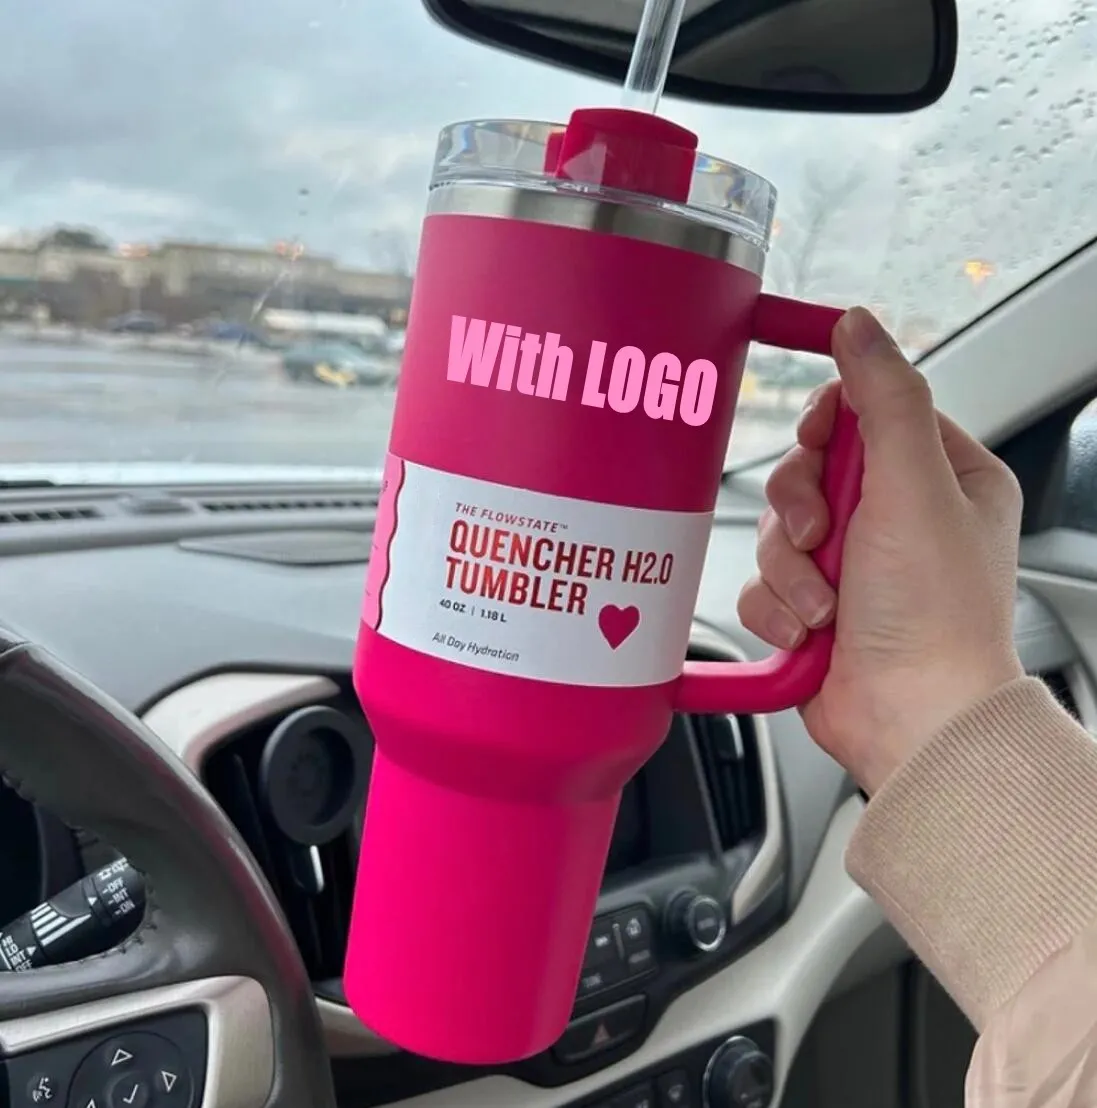 US Stock With Cosmo Winter Pink Flamingo Tumbler Quenching Agent H2.0 Replica 40oz Cup Lid and Straw 1:1 same Car Cup Water Bottle Target Red GG0116